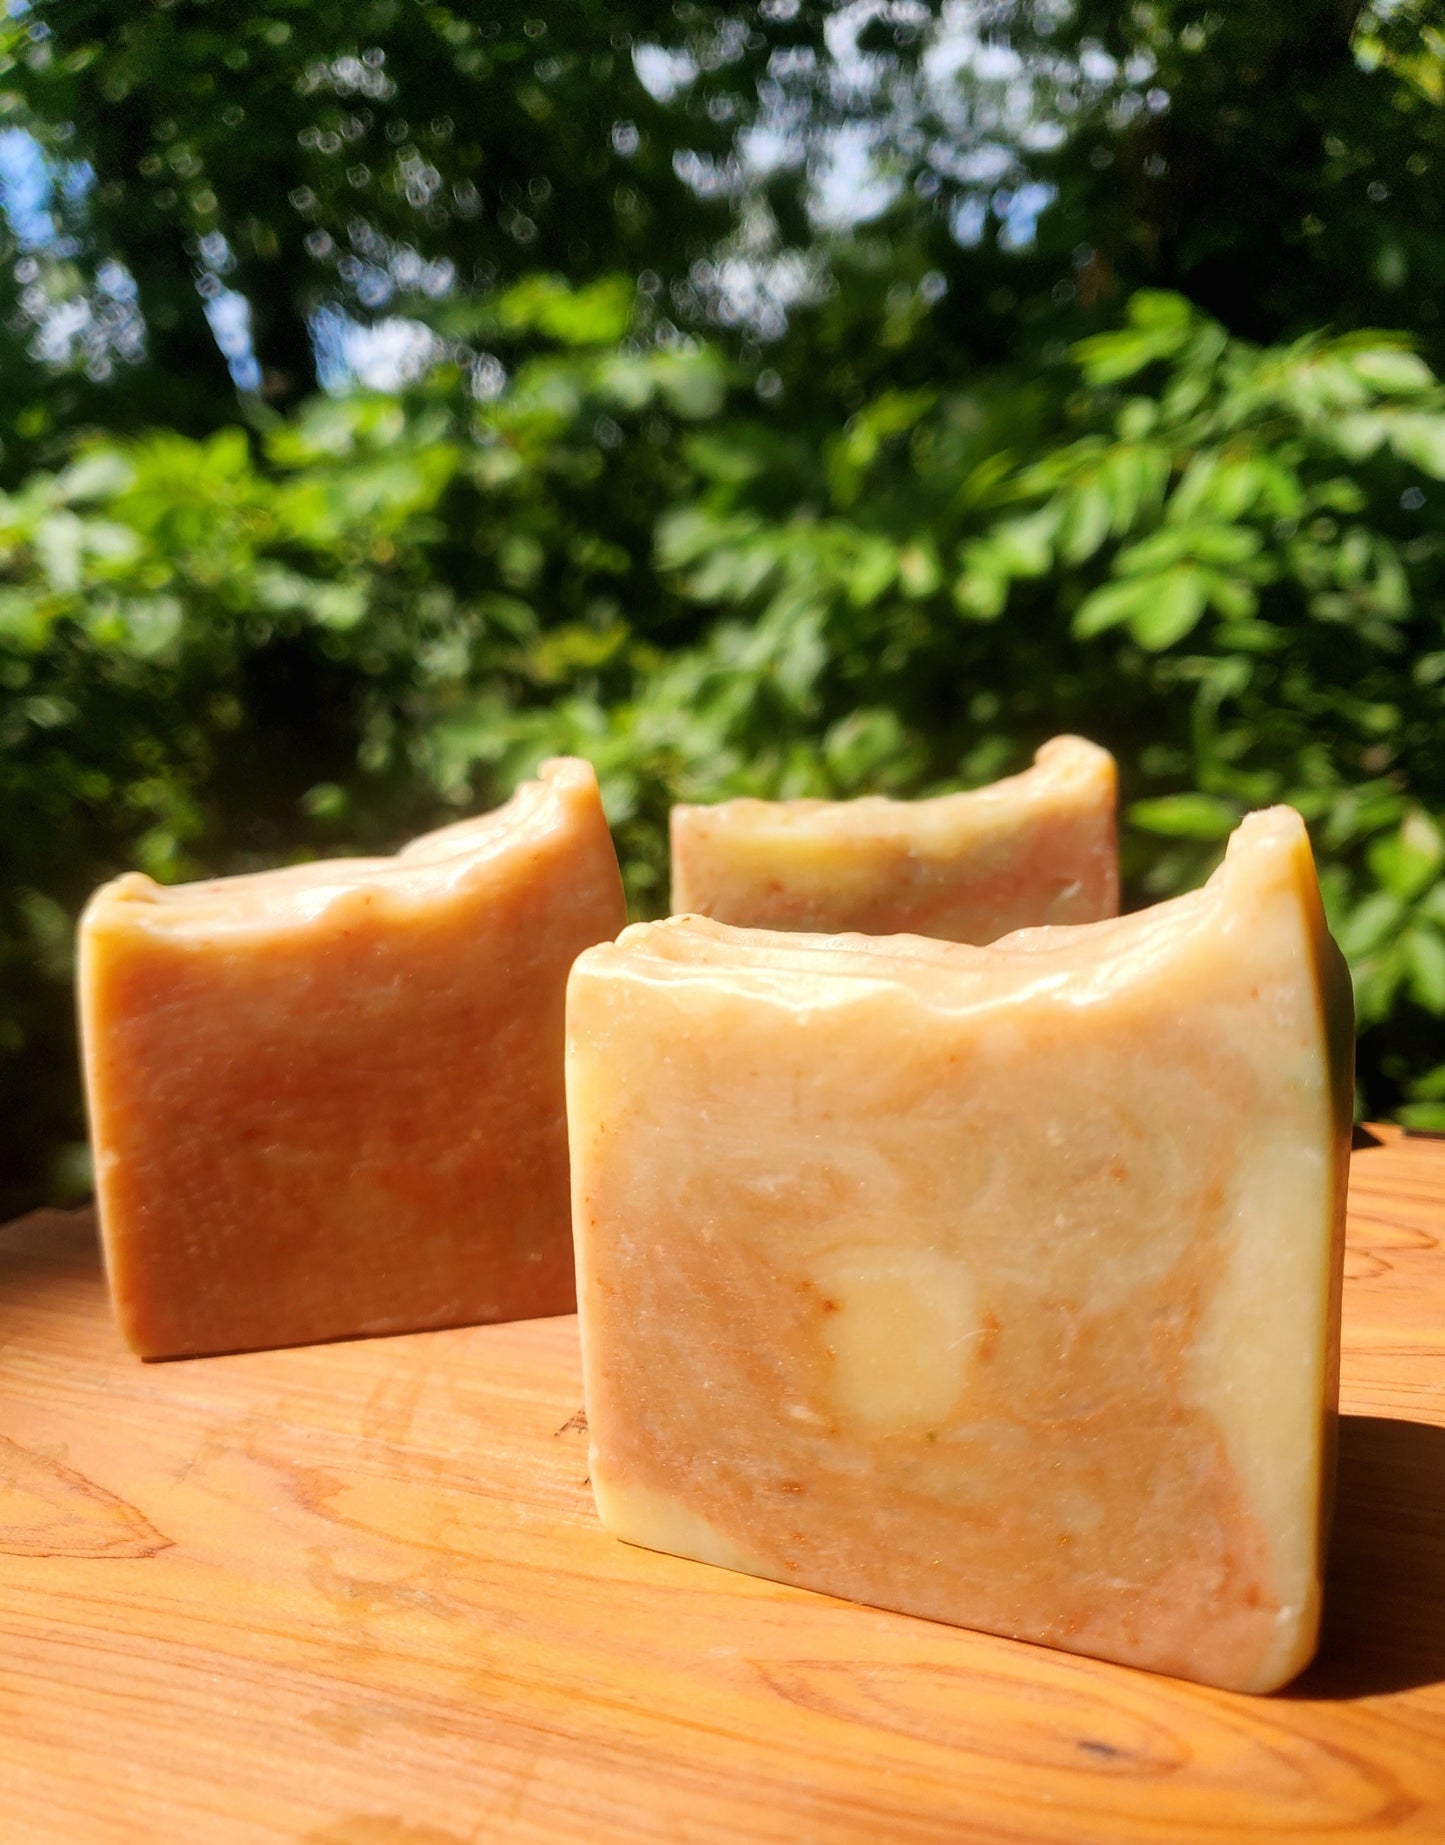 Several bars of CBD natural soap outside with green trees in the background